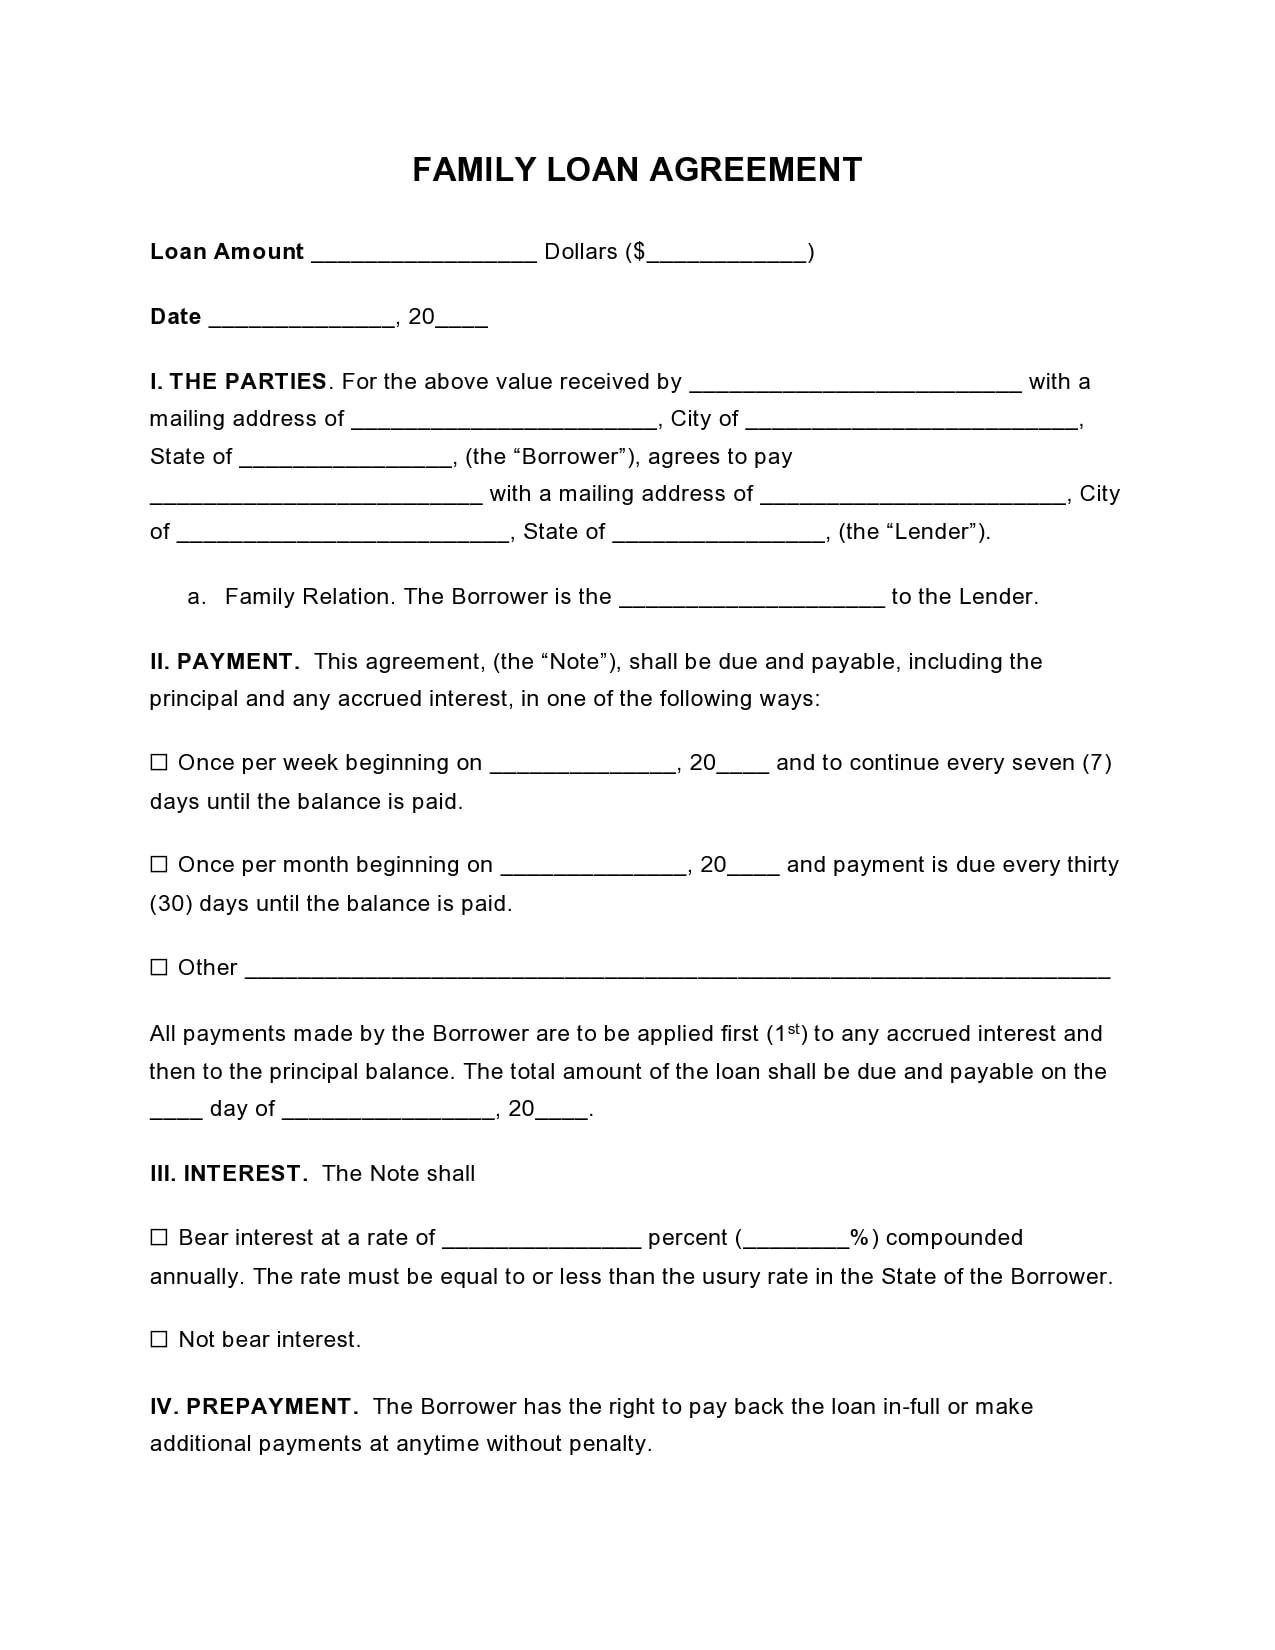 23 Simple Family Loan Agreement Templates (23% Free) In debt agreement templates